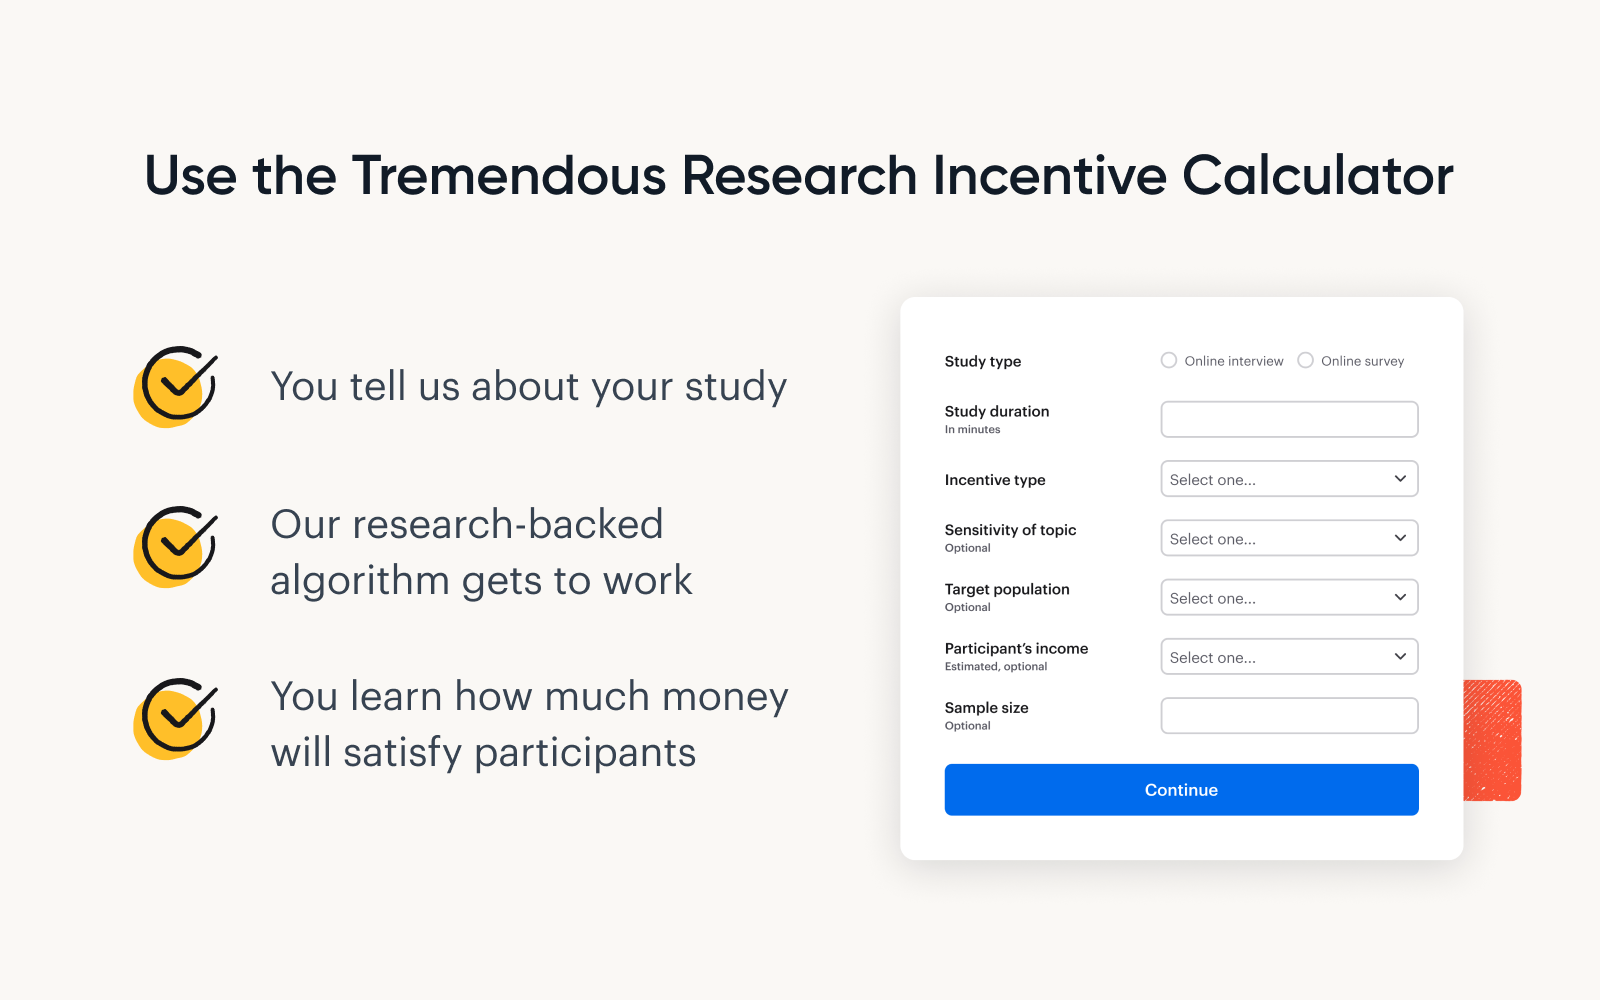 A graphic explaining how the Tremendous Research Incentive Calculator works. Simply tell us about your study, and you'll learn how much money will satisfy participants.